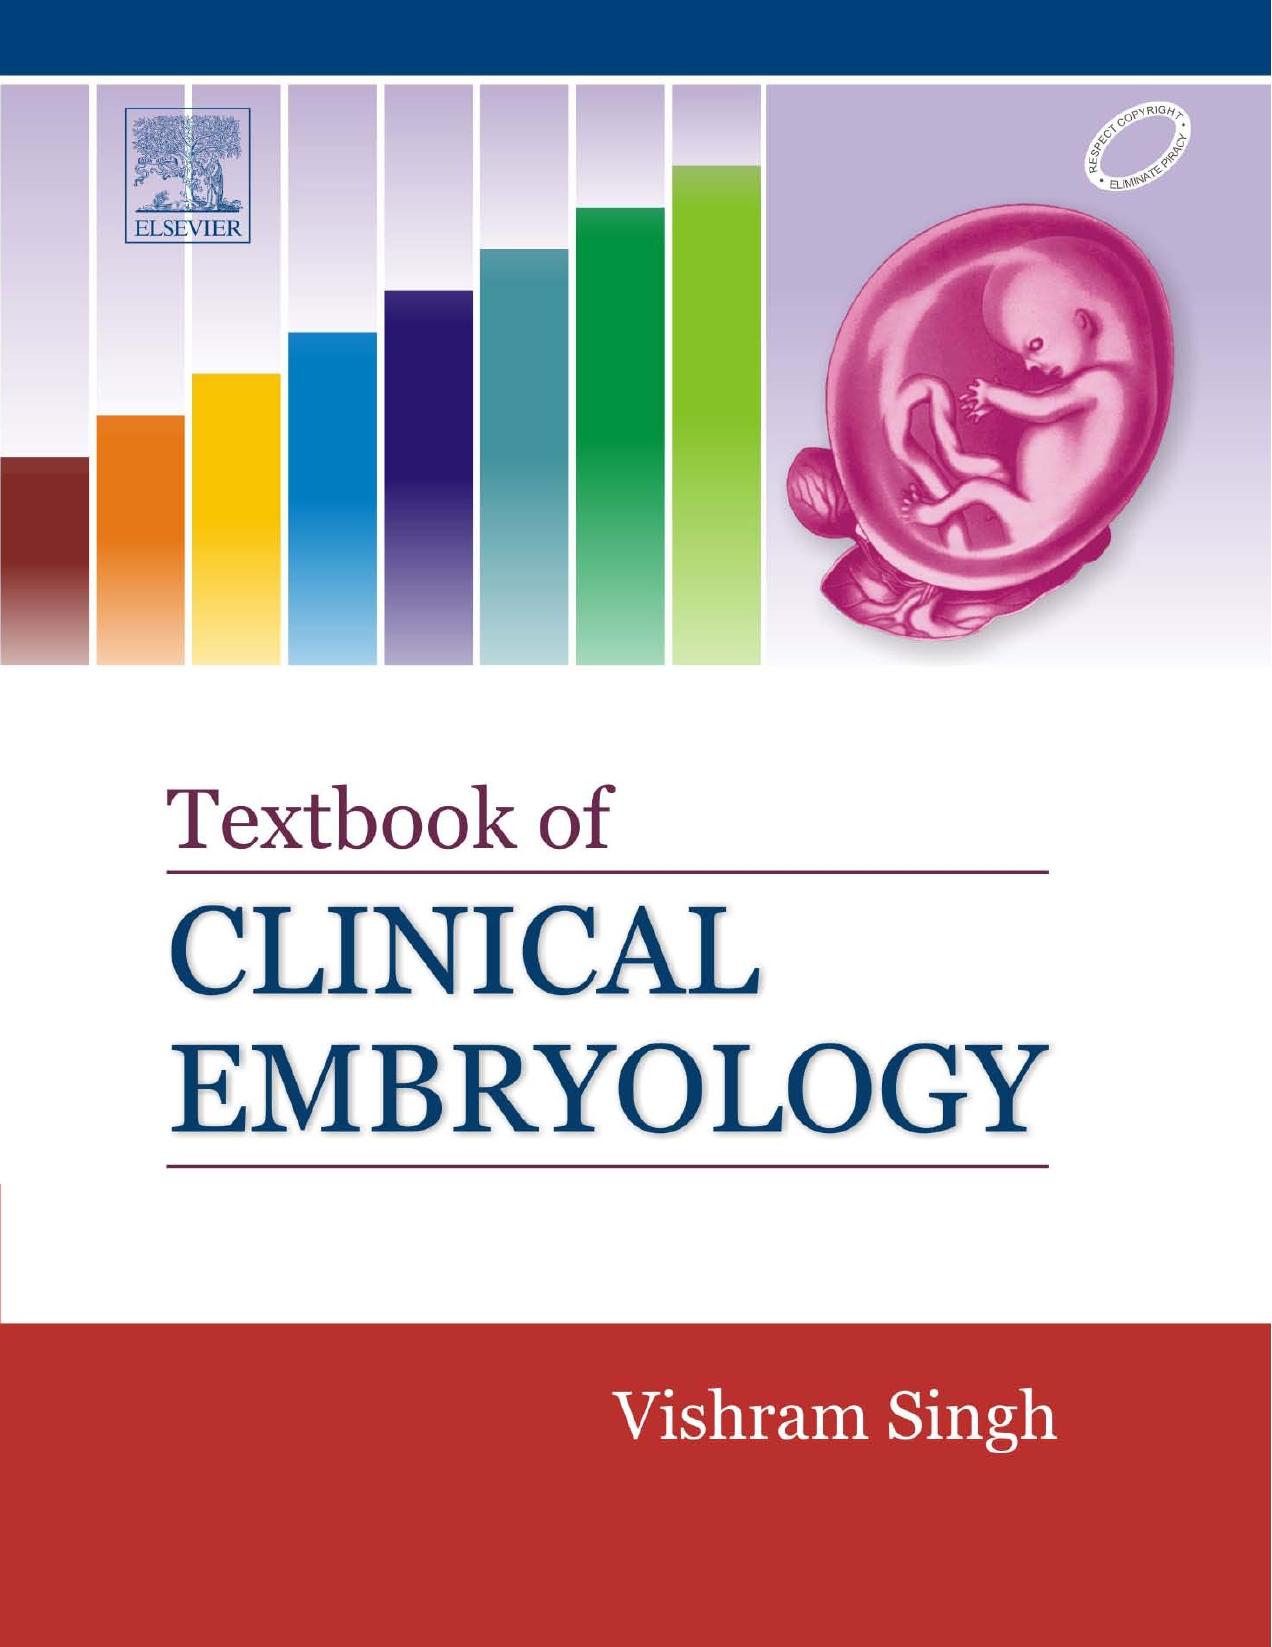 Textbook Of Embryology 2012